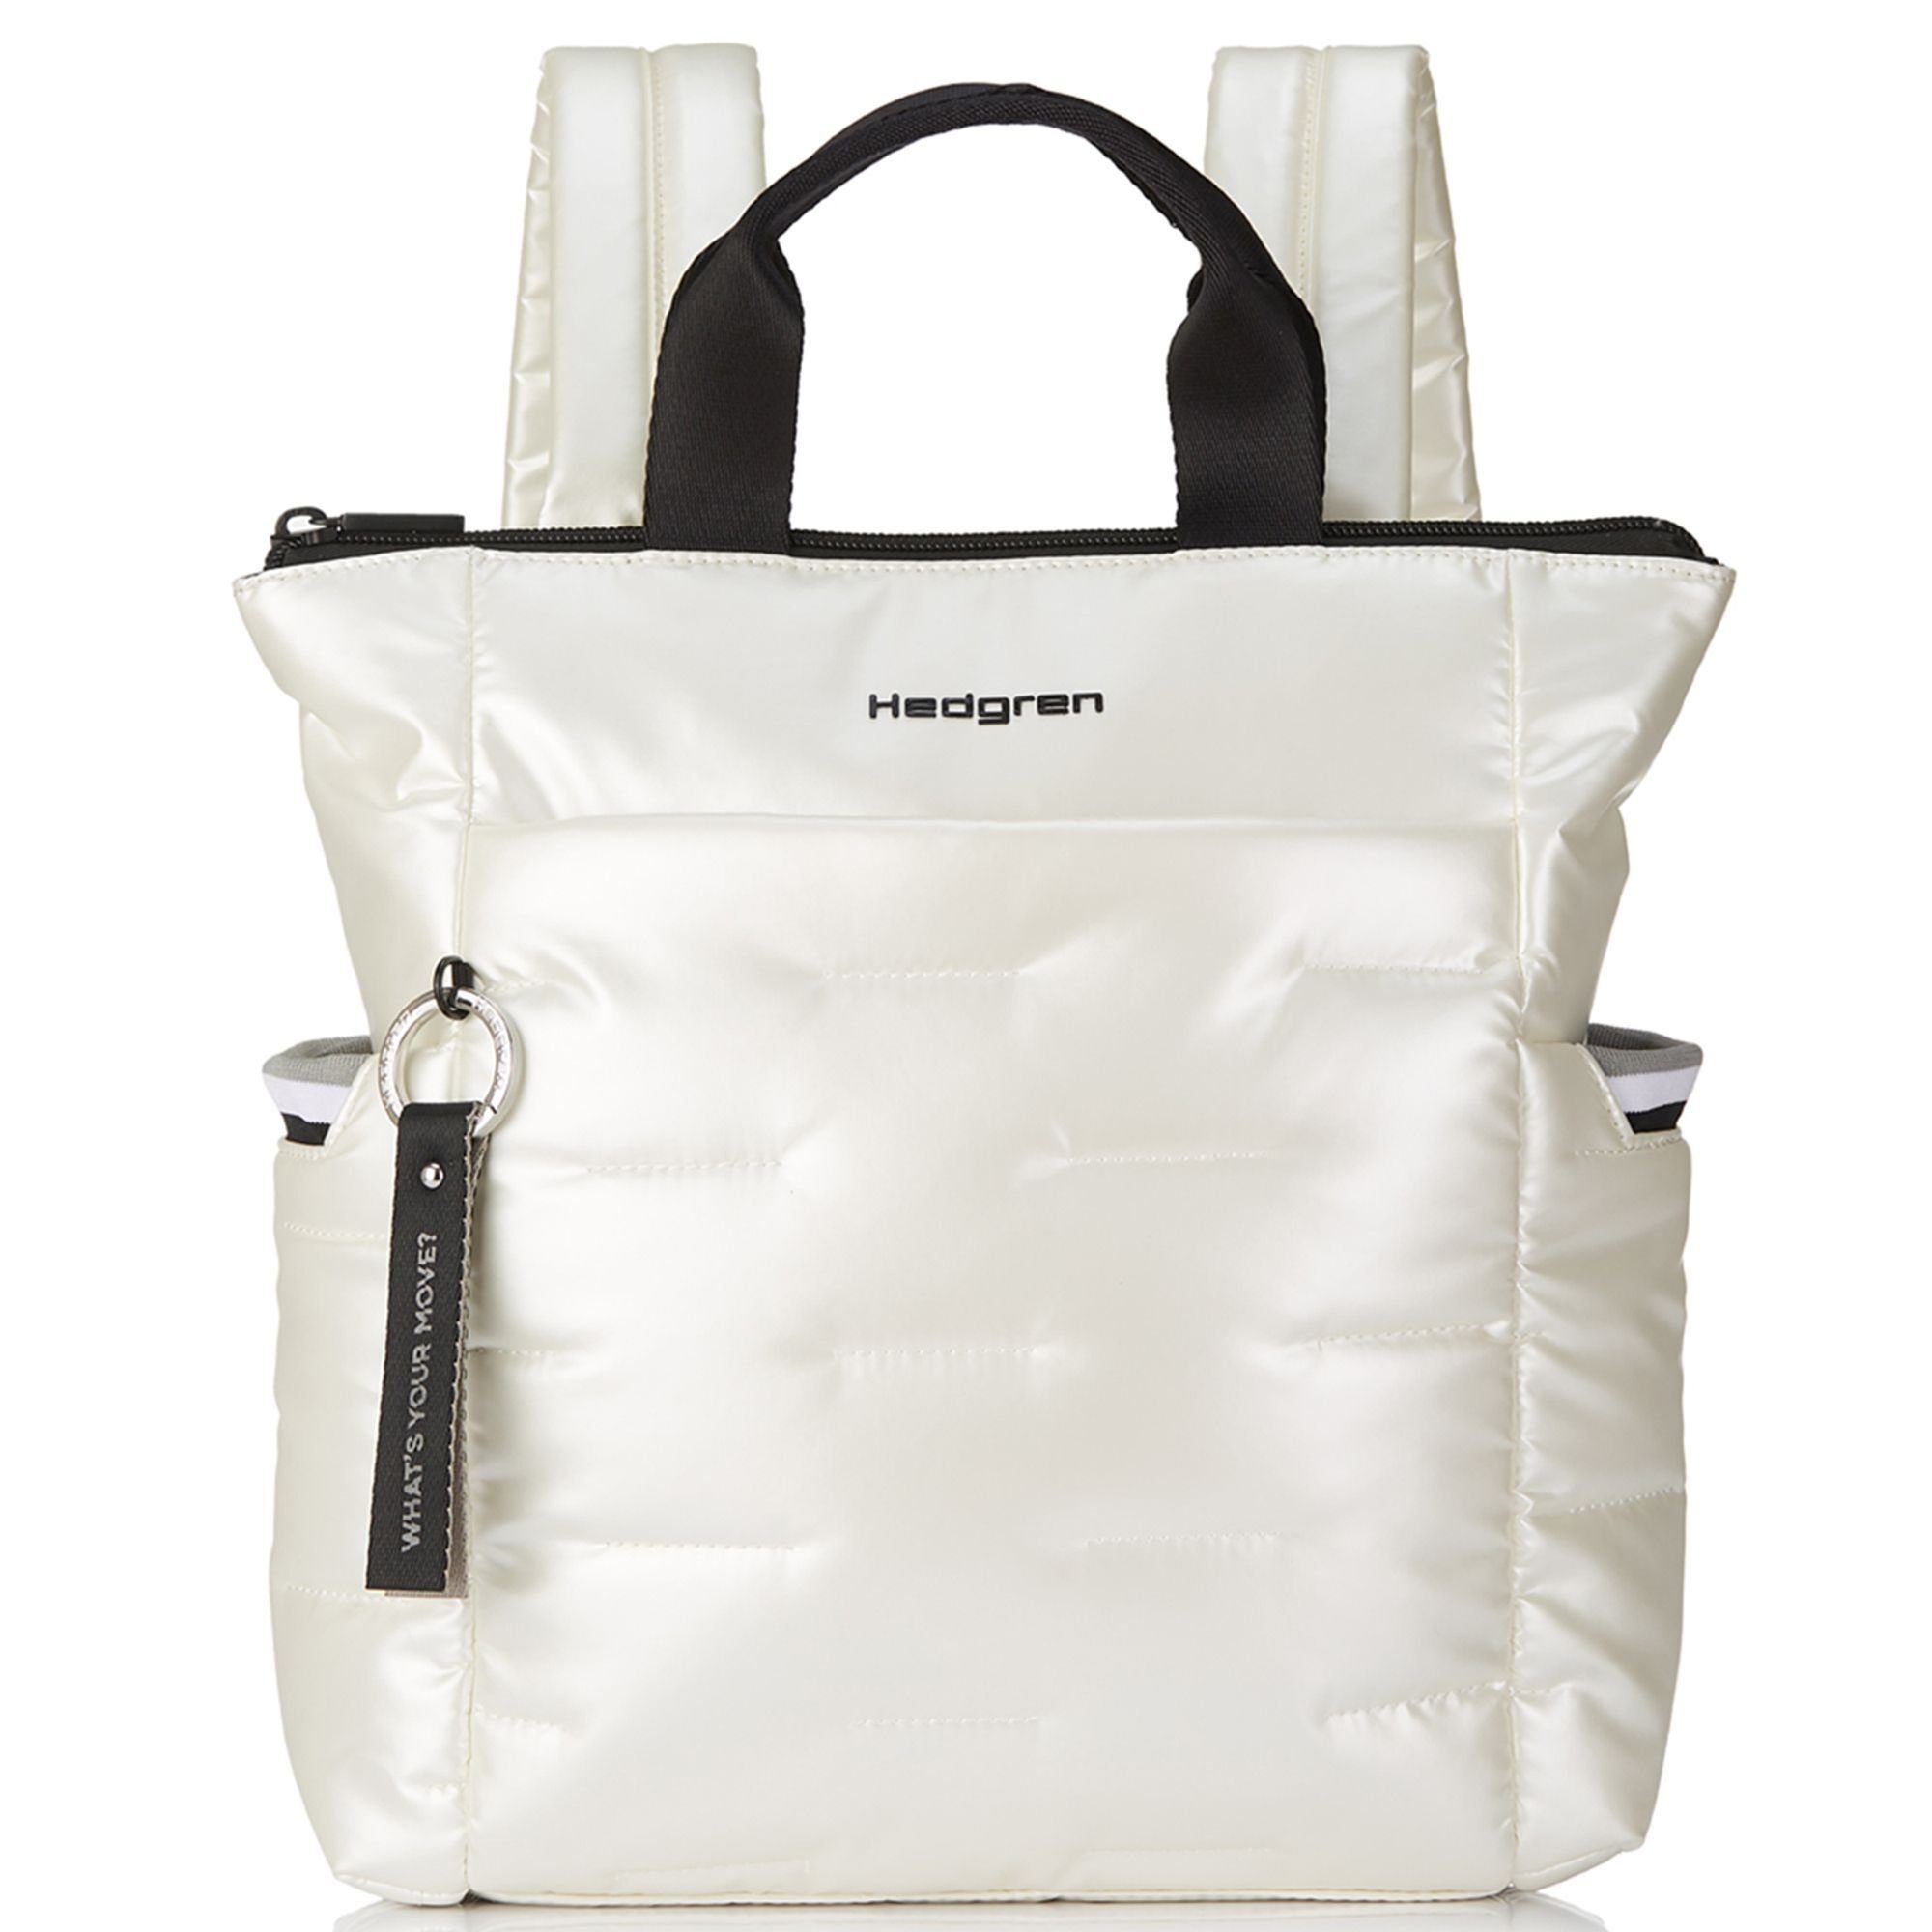 Polyester pearly Hedgren Rucksack white Cocoon,